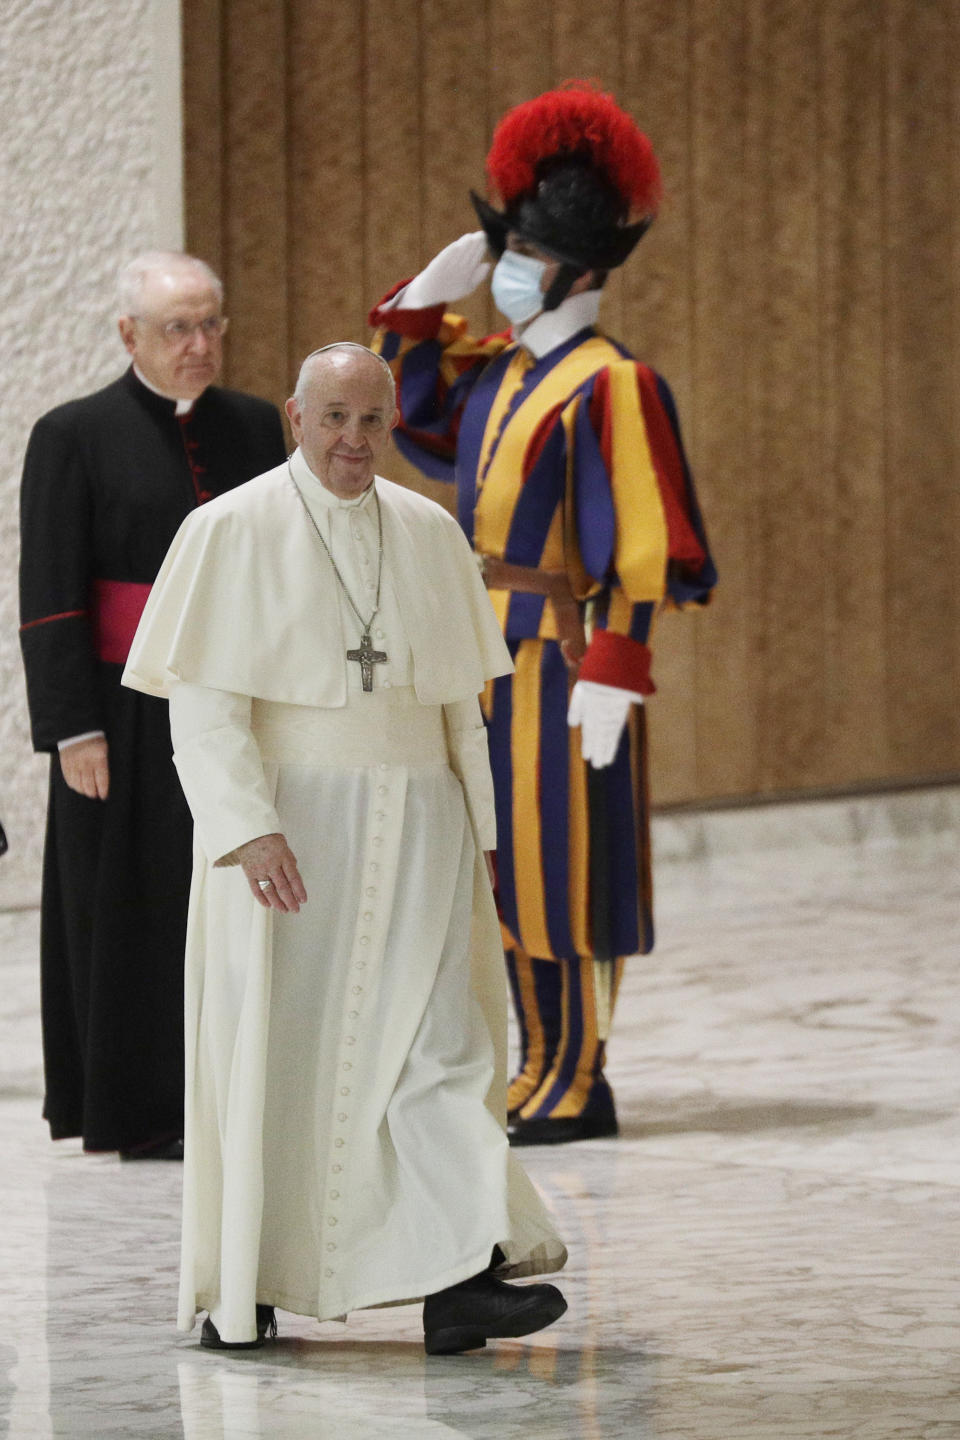 Pope Francis arrives in the Paul VI hall on the occasion of the weekly general audience at the Vatican, Wednesday, Oct. 21, 2020. (AP Photo/Gregorio Borgia)